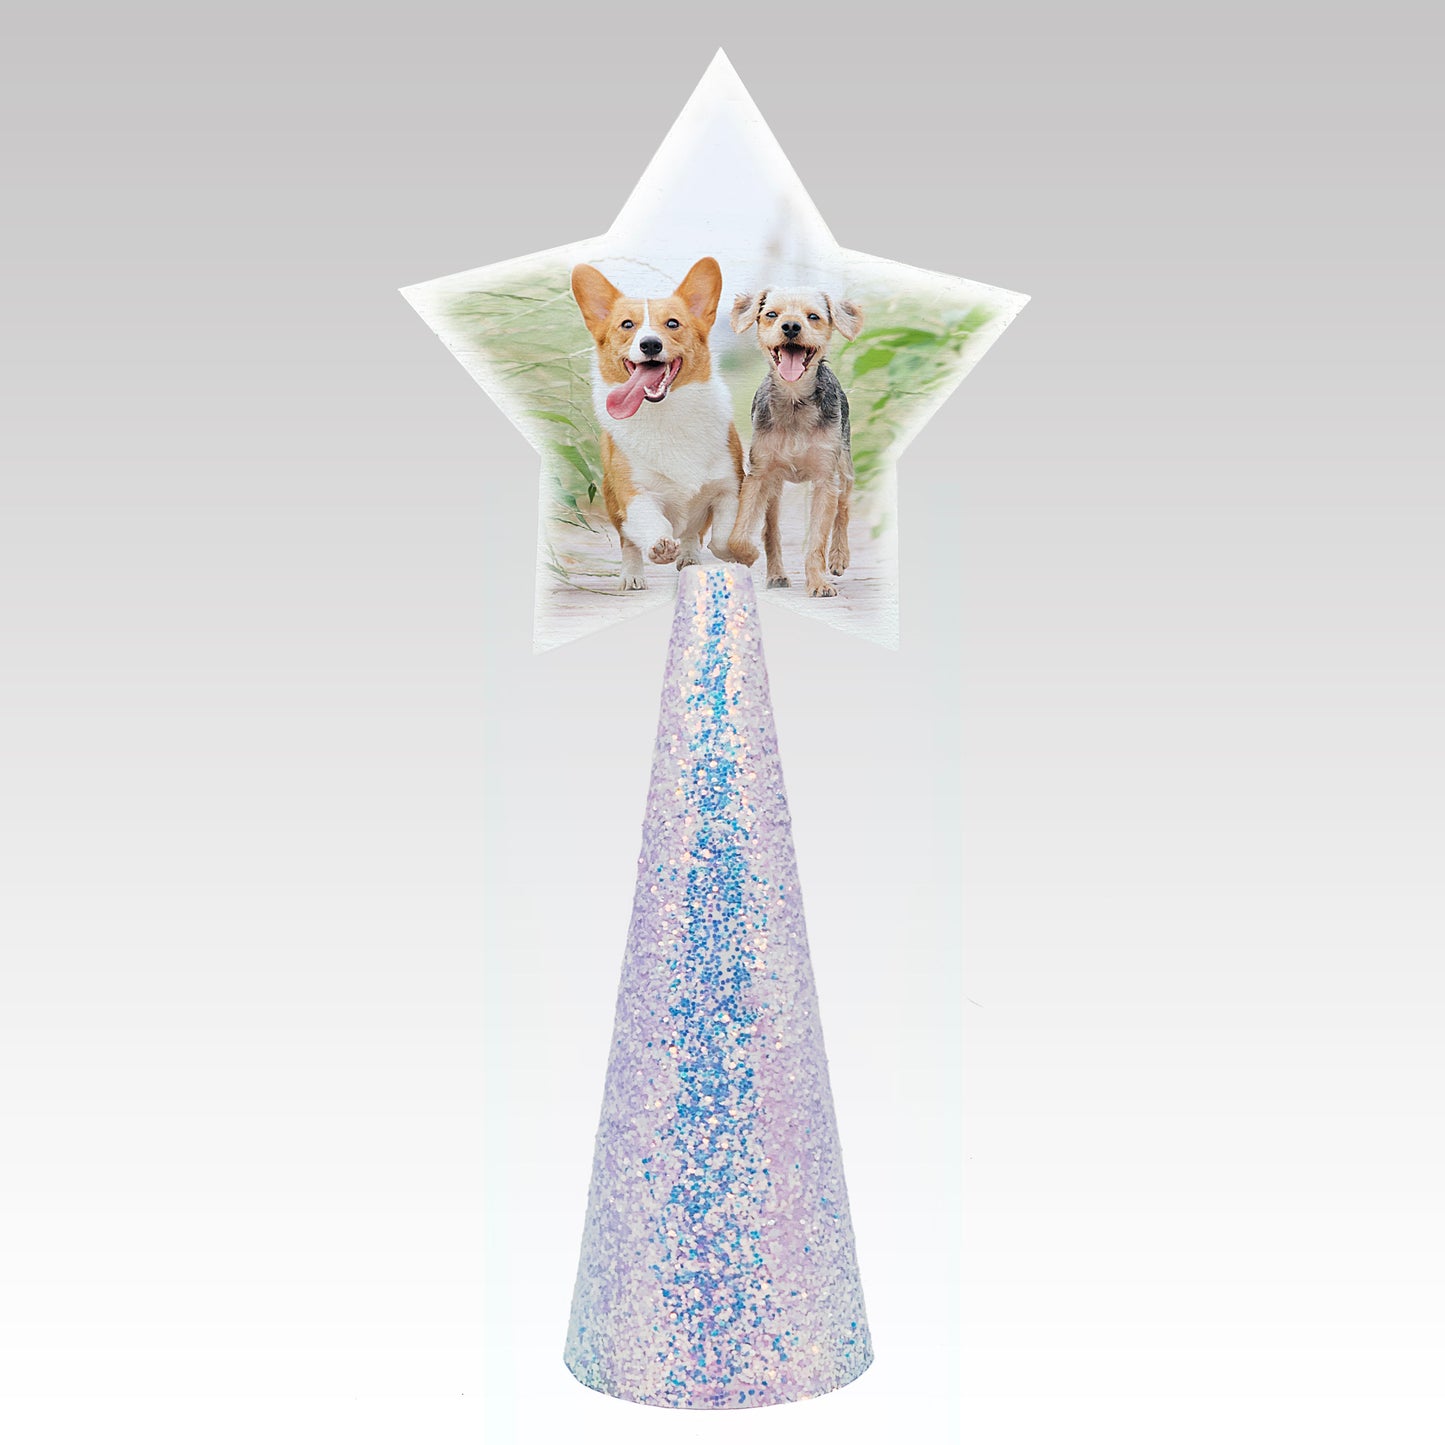 Custom tree topper - White Star with sample 2 happy dogs photo - opal iridescent glitter cone